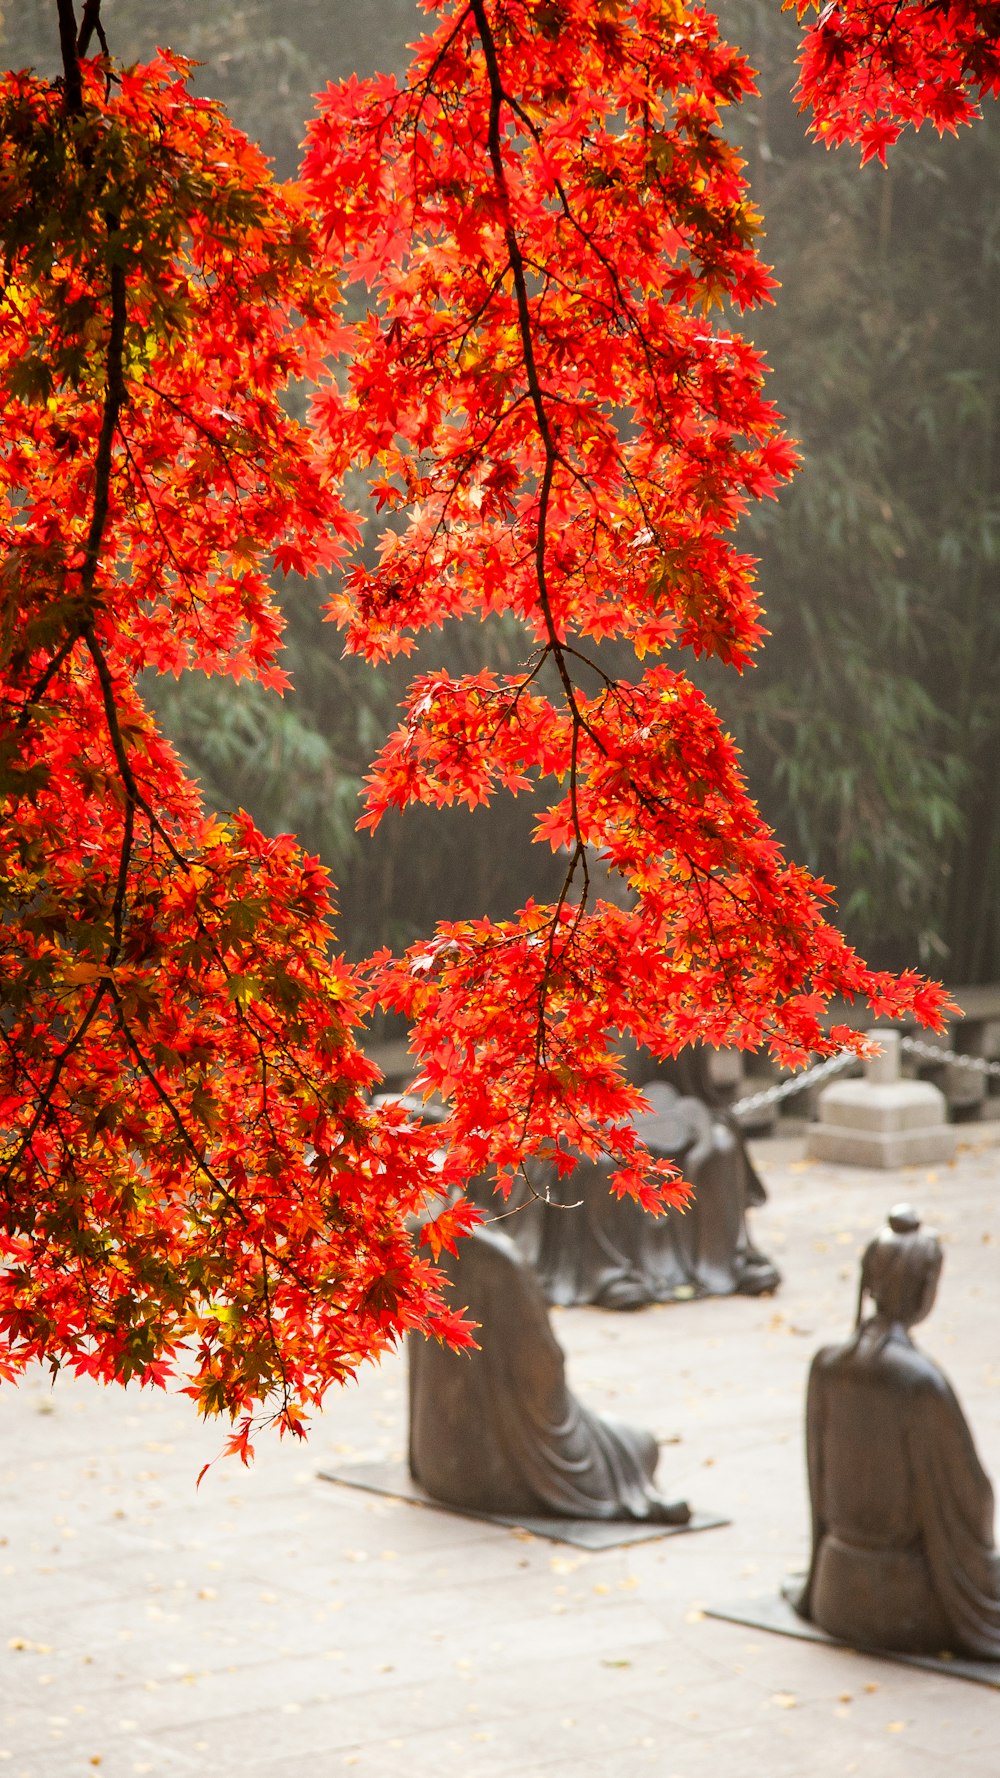 a couple of statues sitting under a red tree